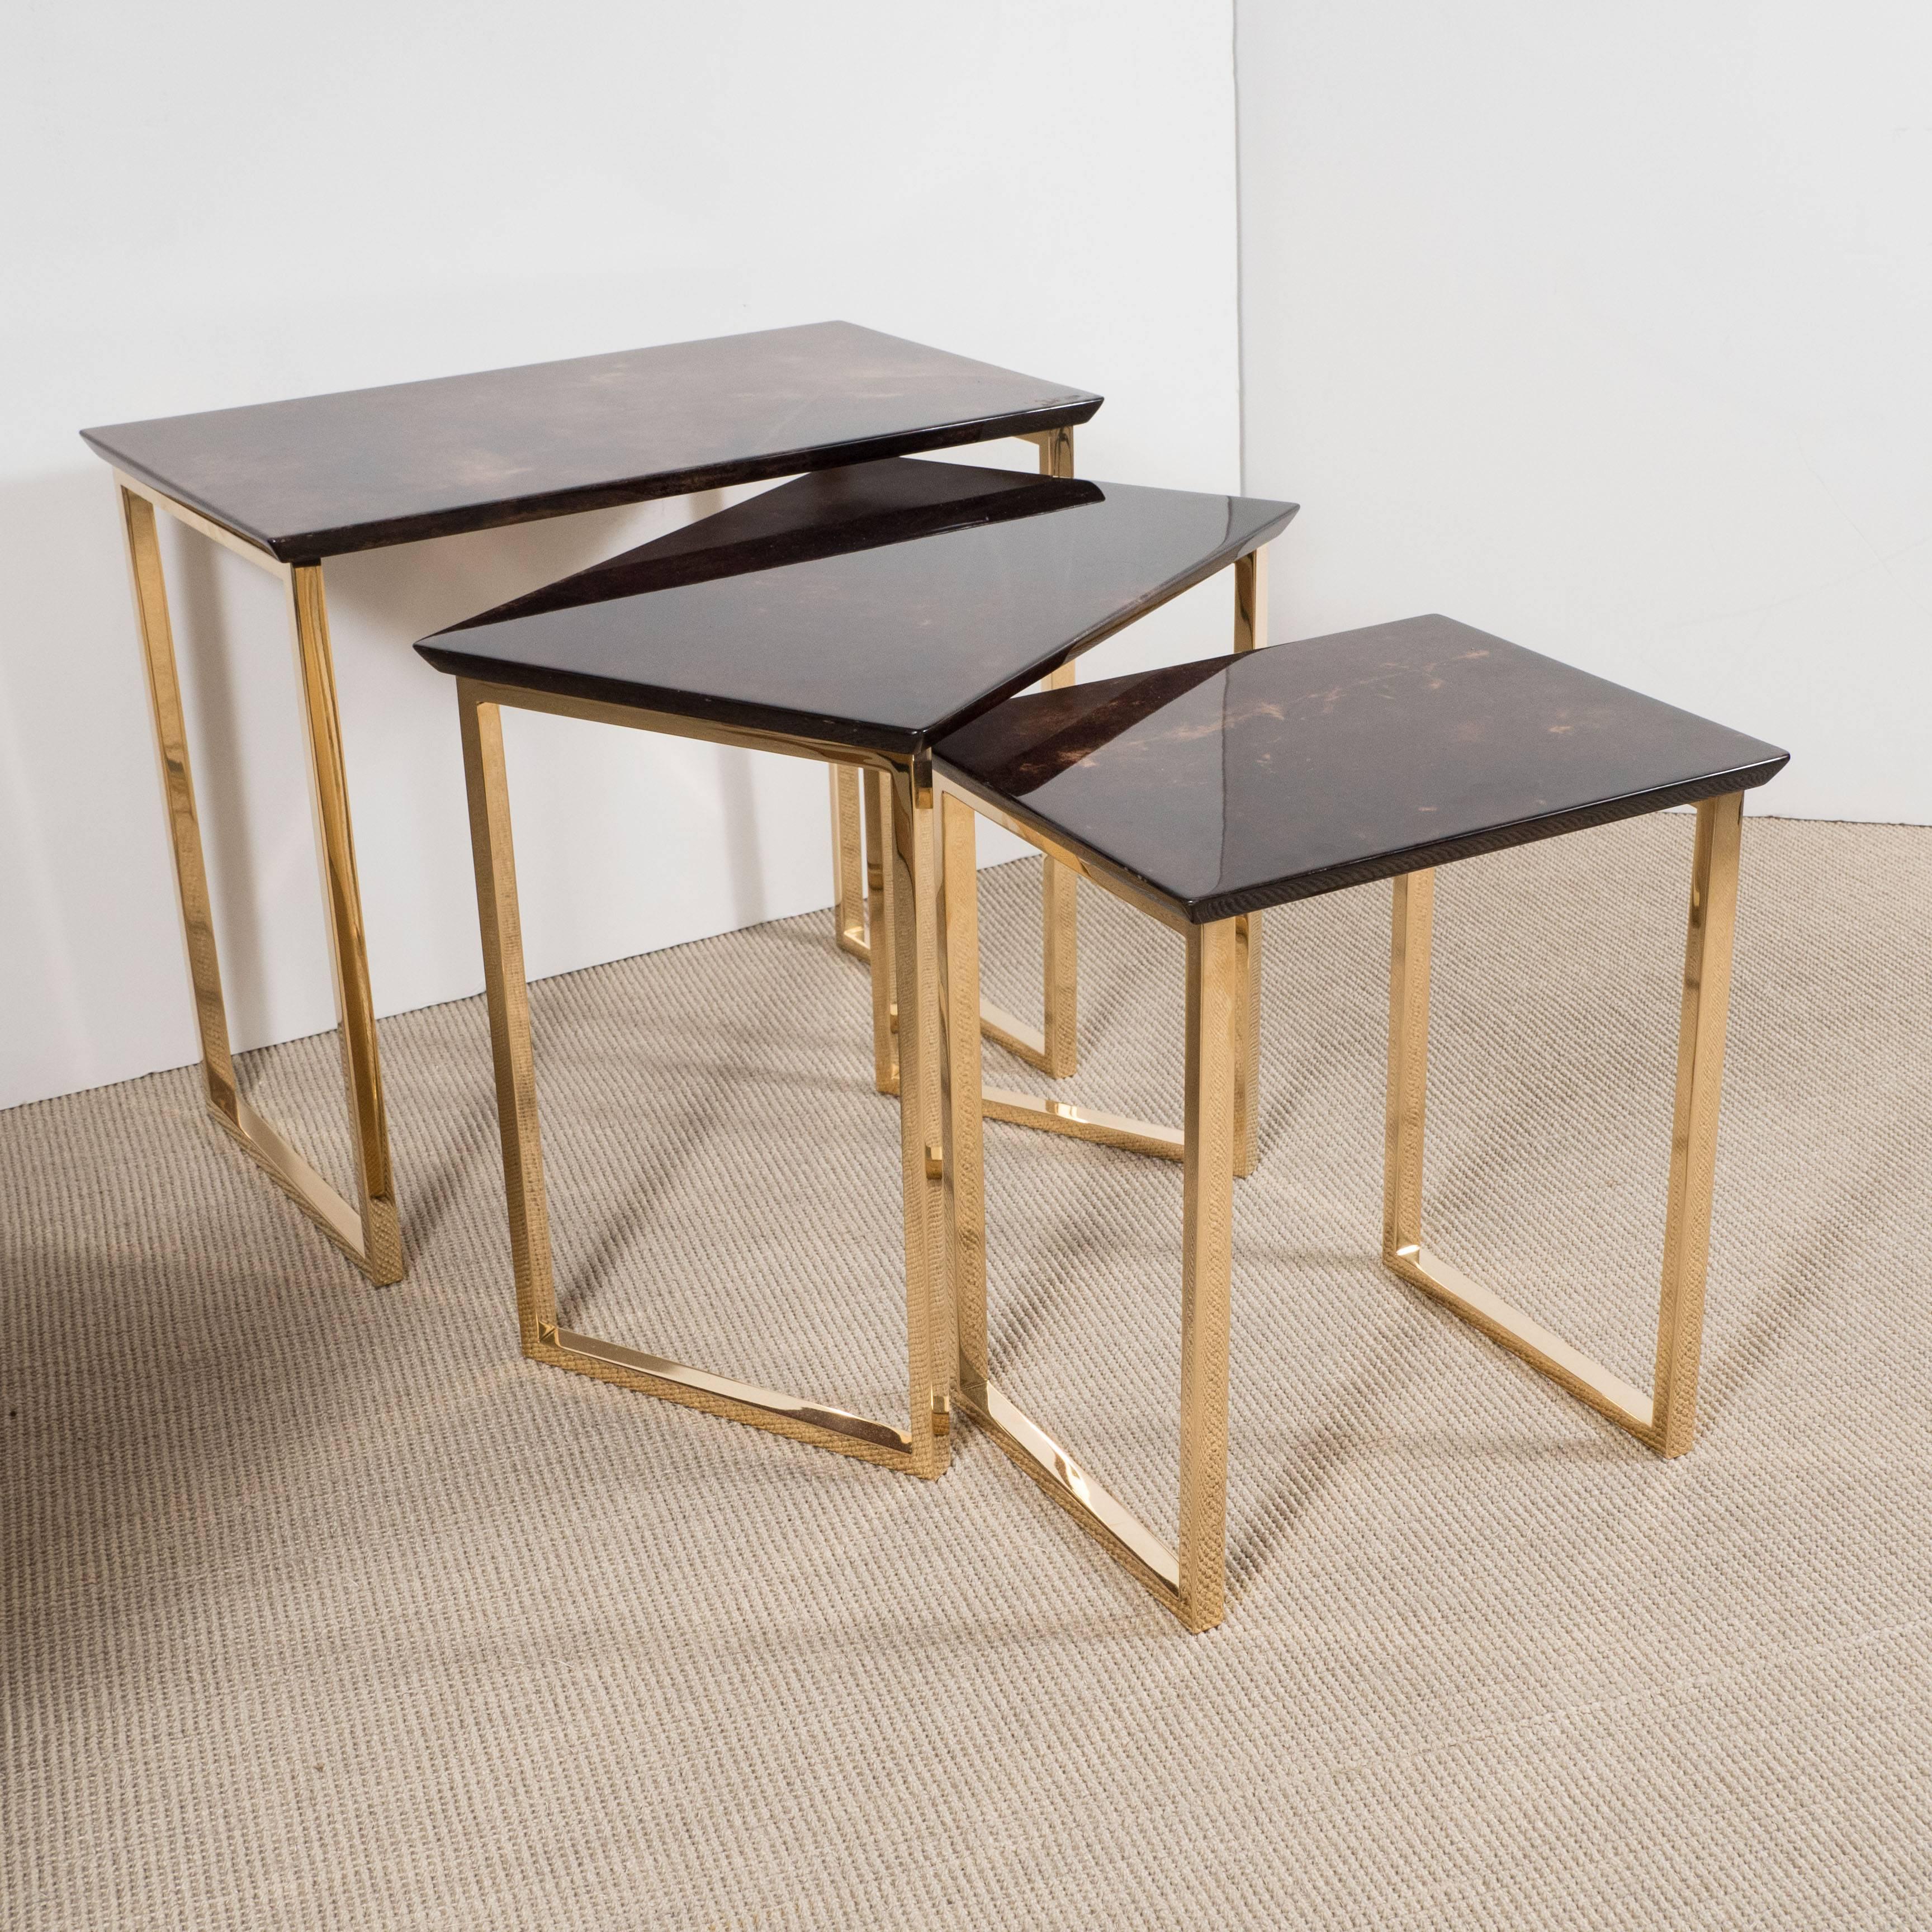 Set of three aldo tura parchment rectangular nesting tables with polished bronze. Largest: H: 10 to 17 10 to 0 by 12 in. 

Lacquered parchment and solid mirrored bronze.